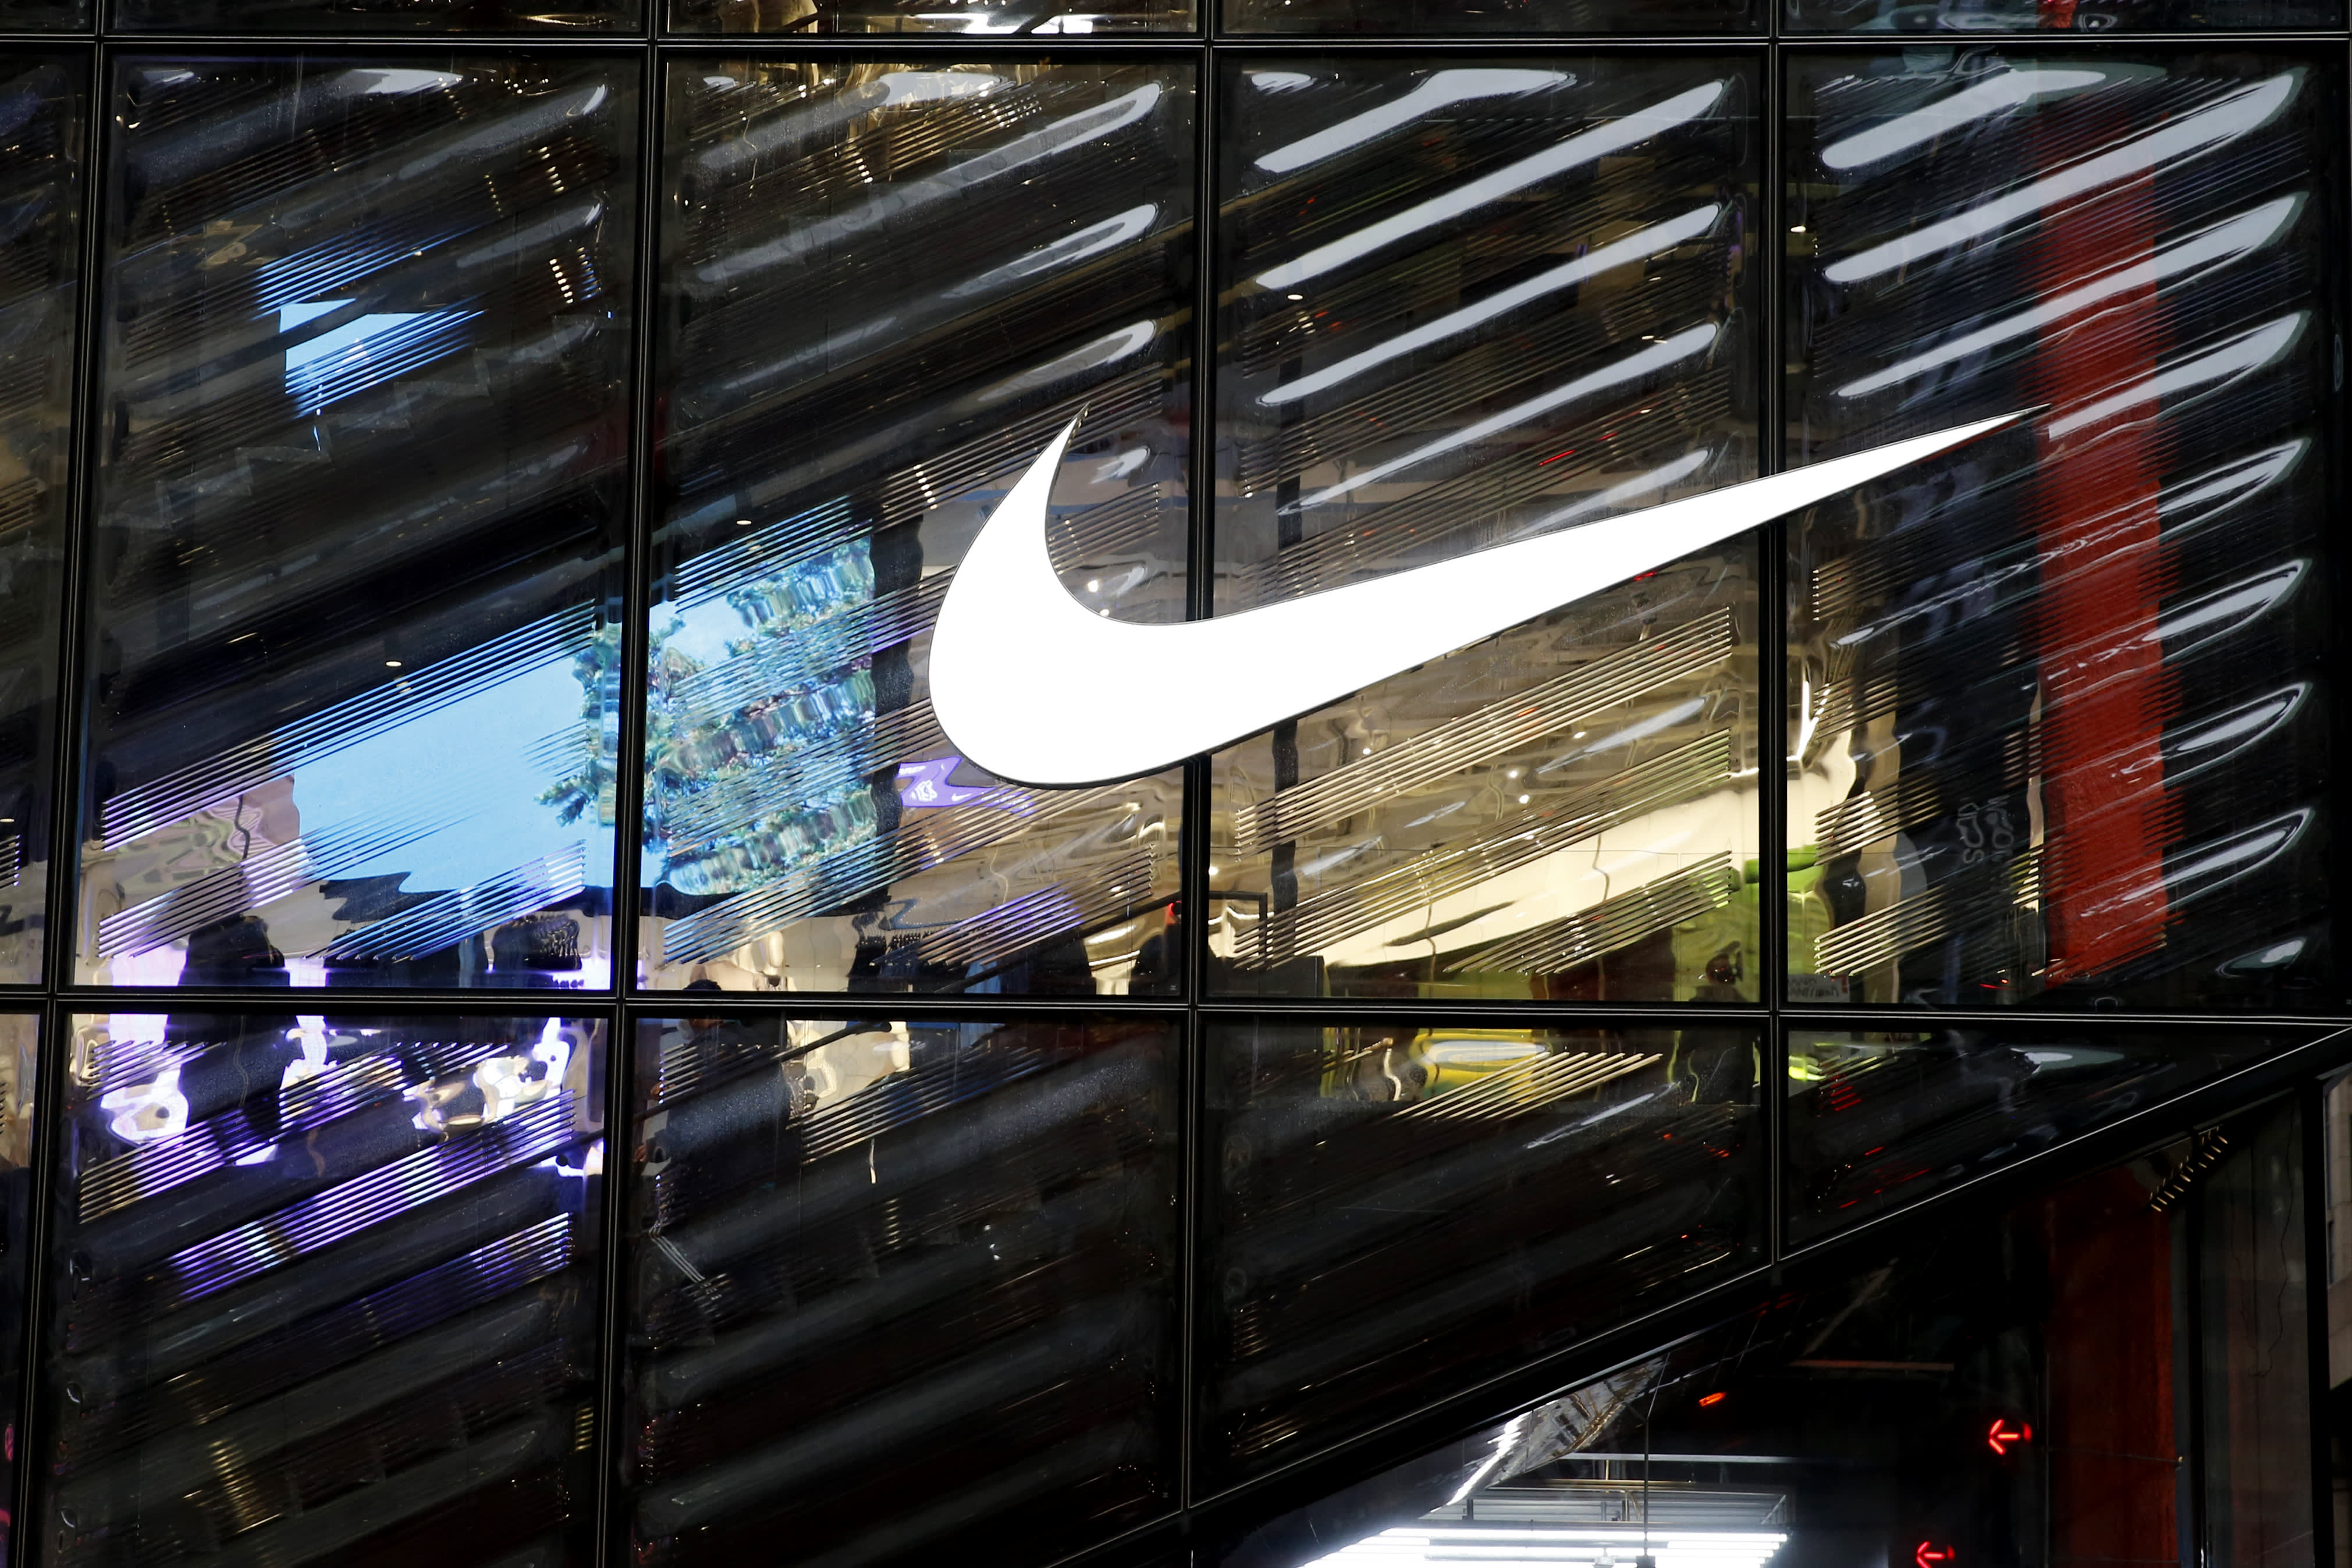 Nike sets diversity goals for 2025 and commits the executive to it